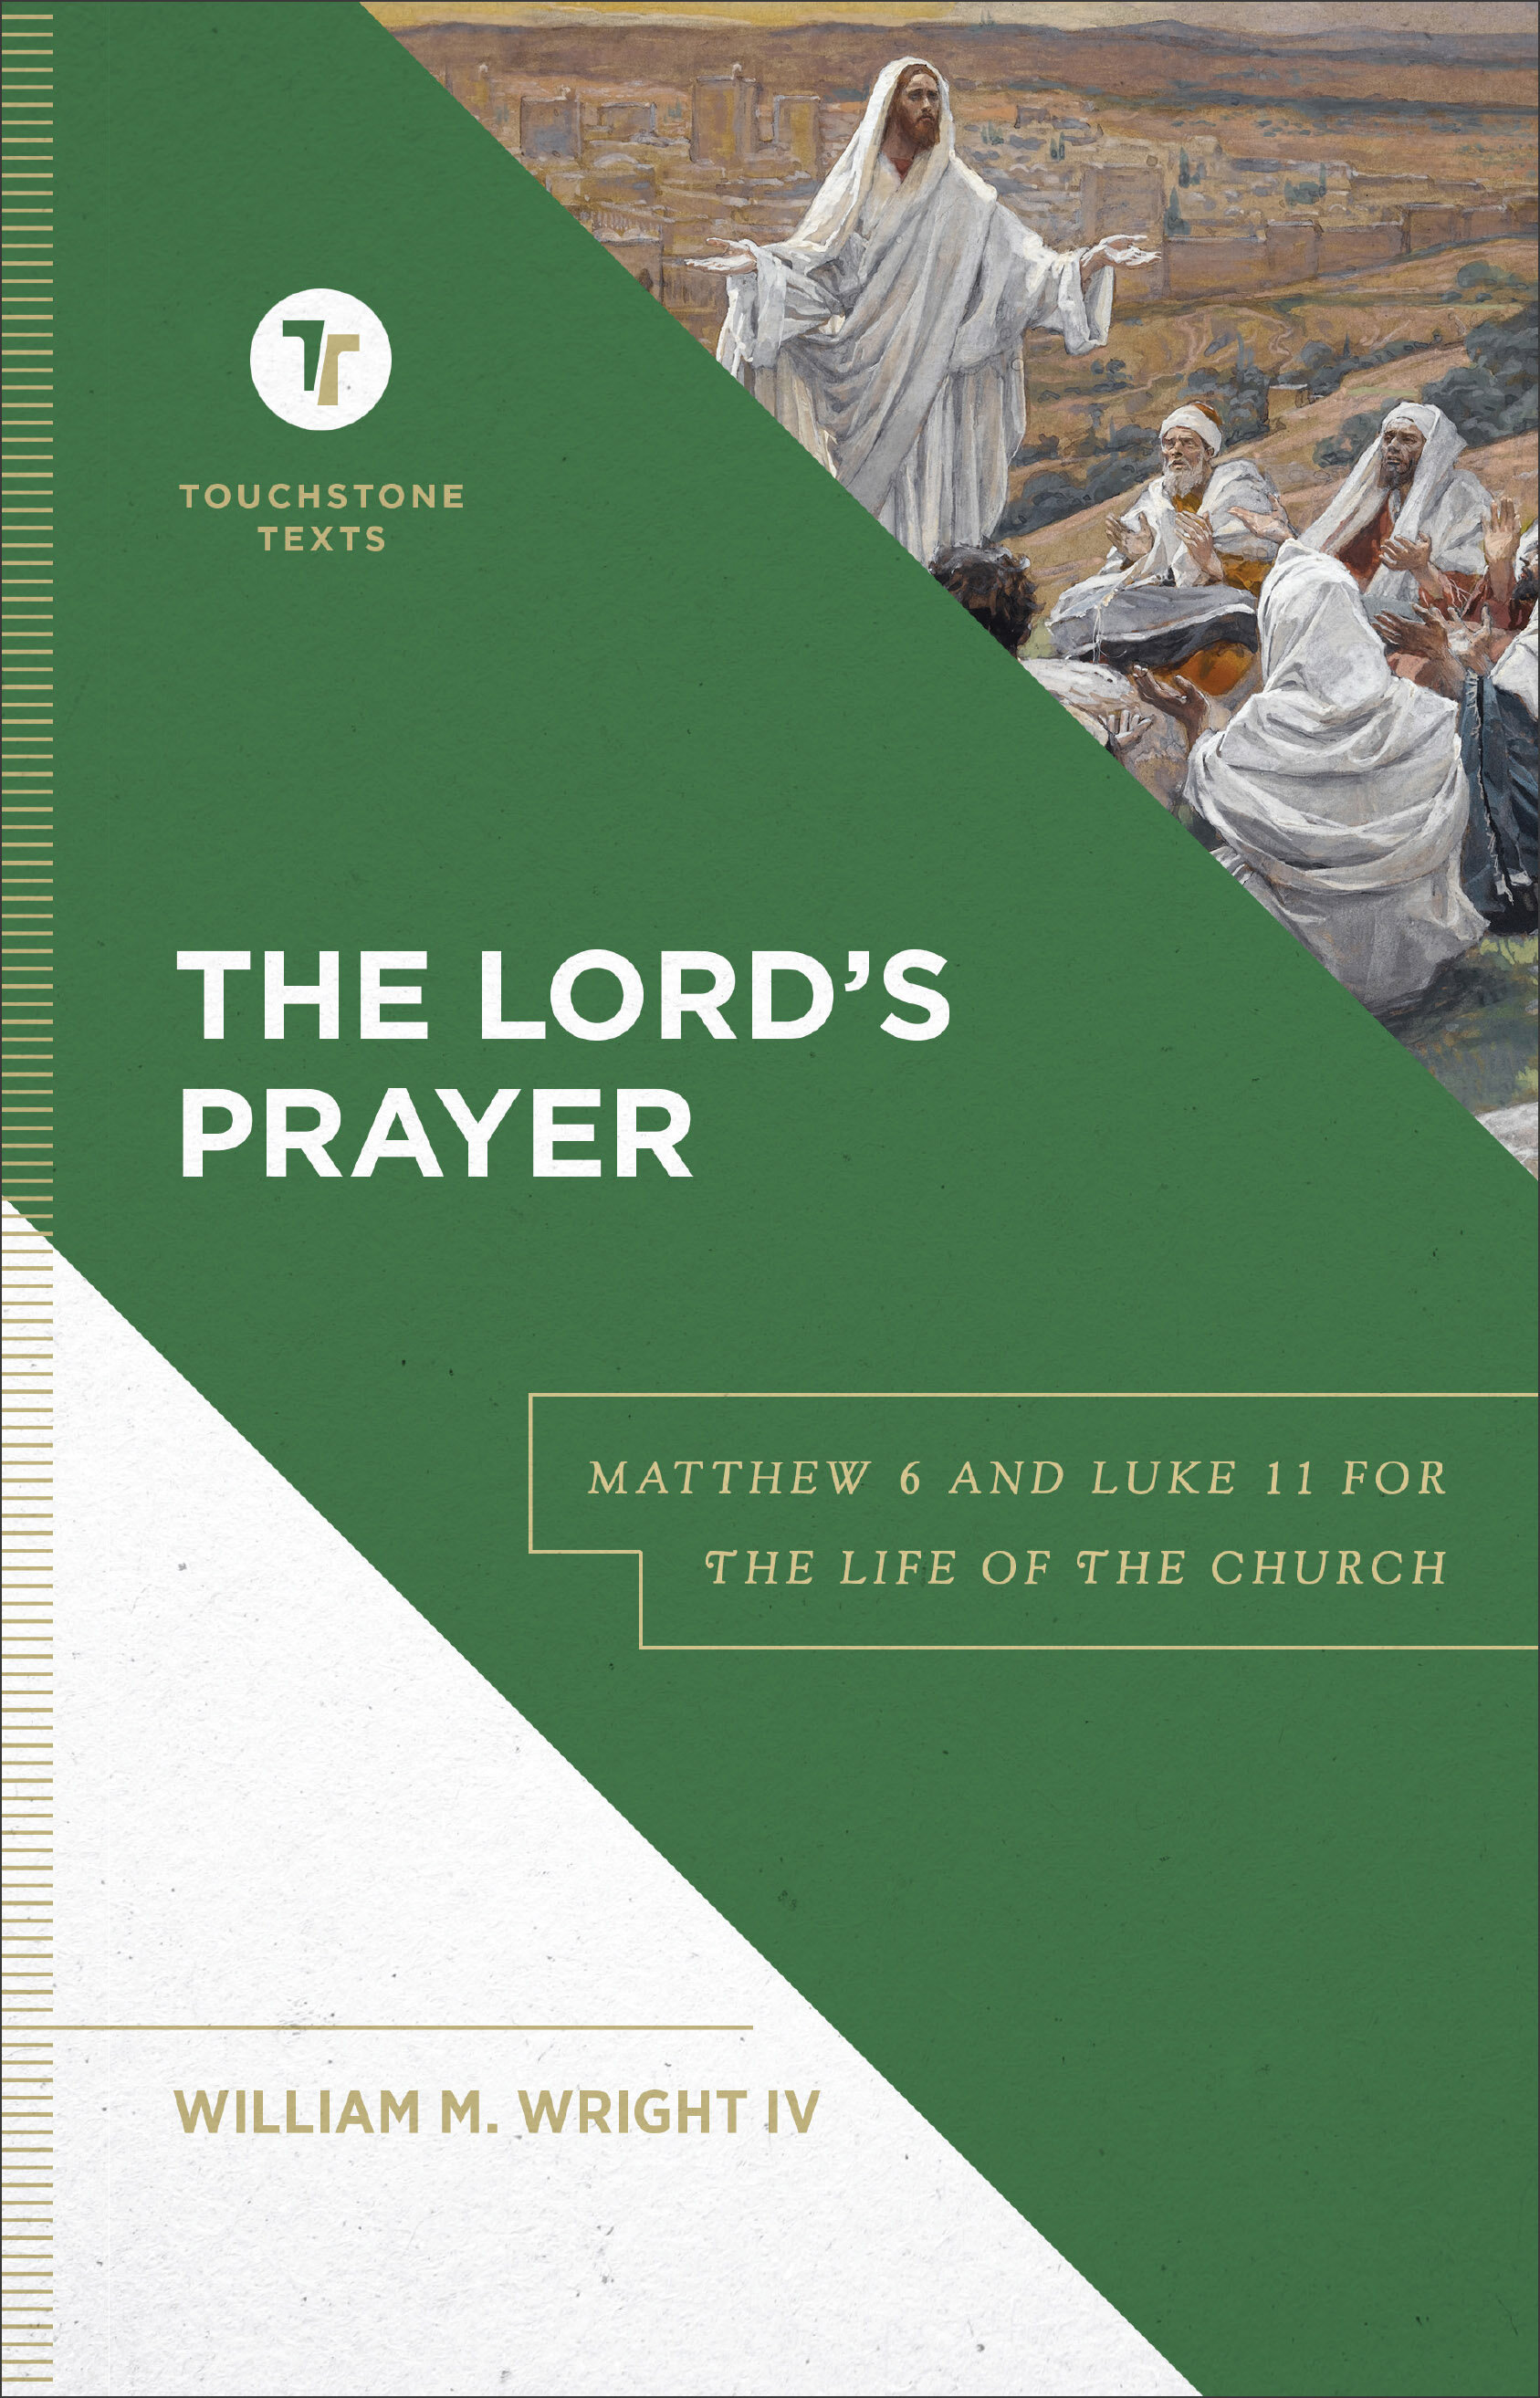 The Lord’s Prayer: Matthew 6 and Luke 11 for the Life of the Church (Touchstone Texts)